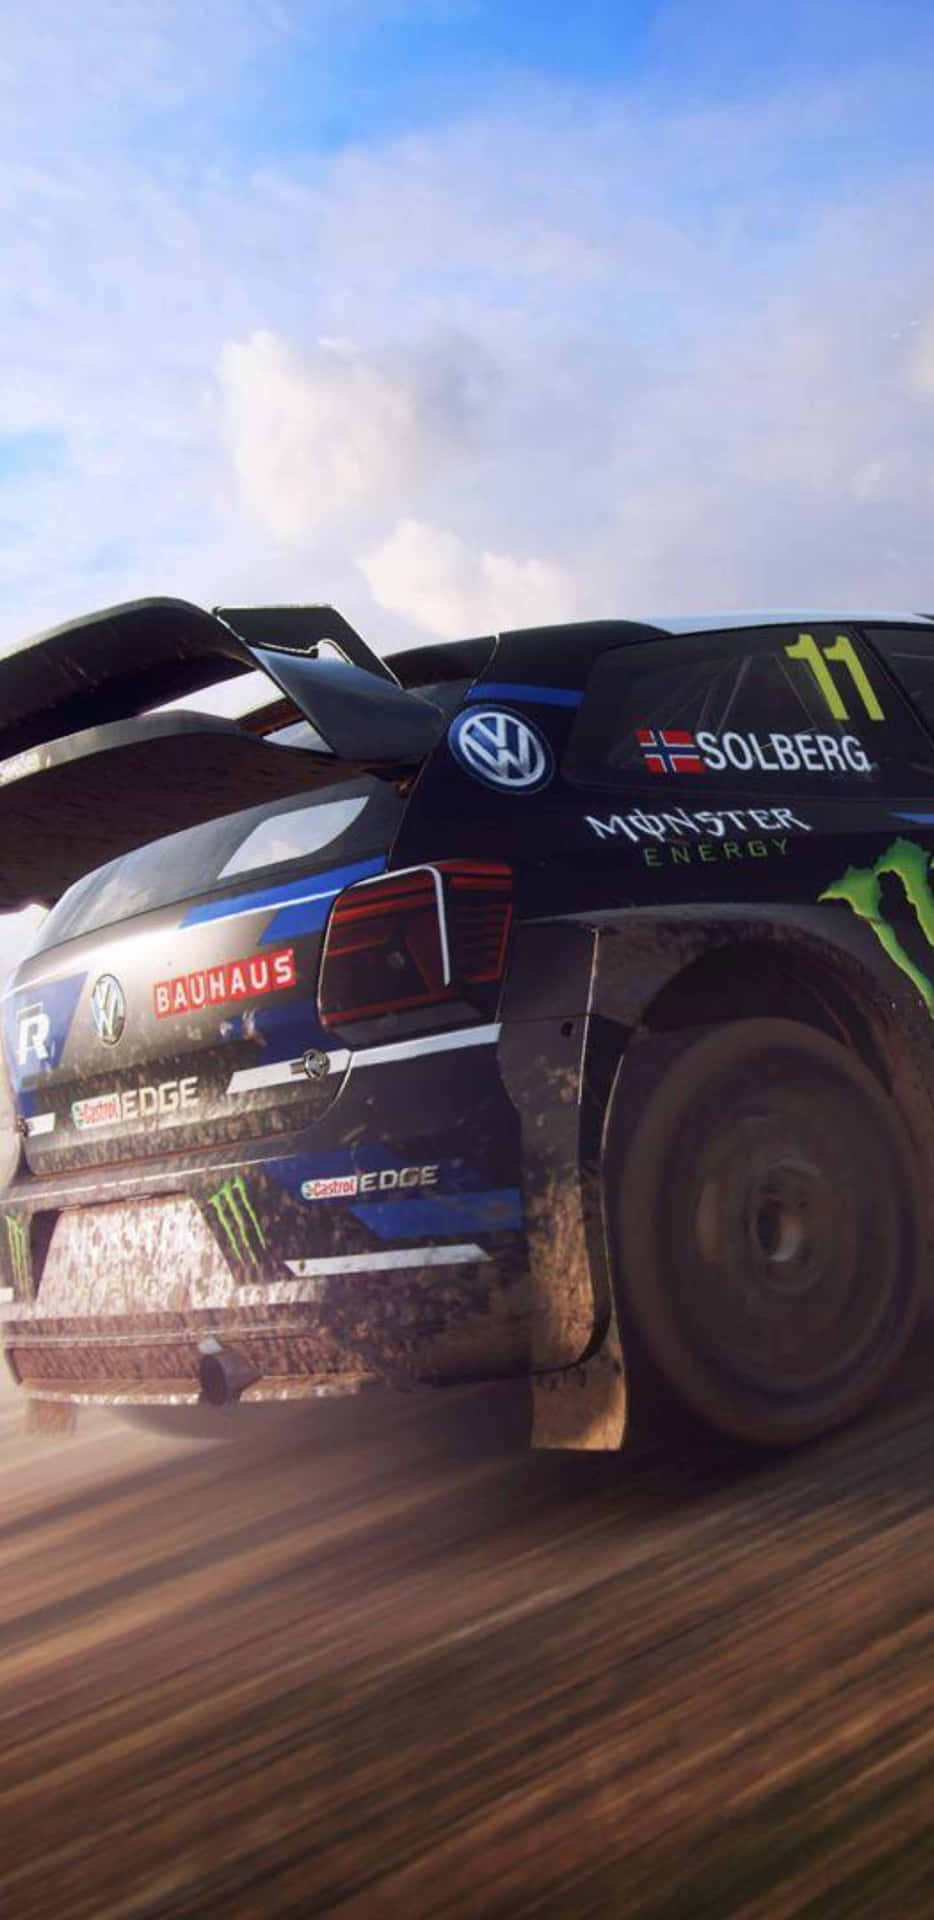 A Volkswagen Rally Car Driving On Dirt